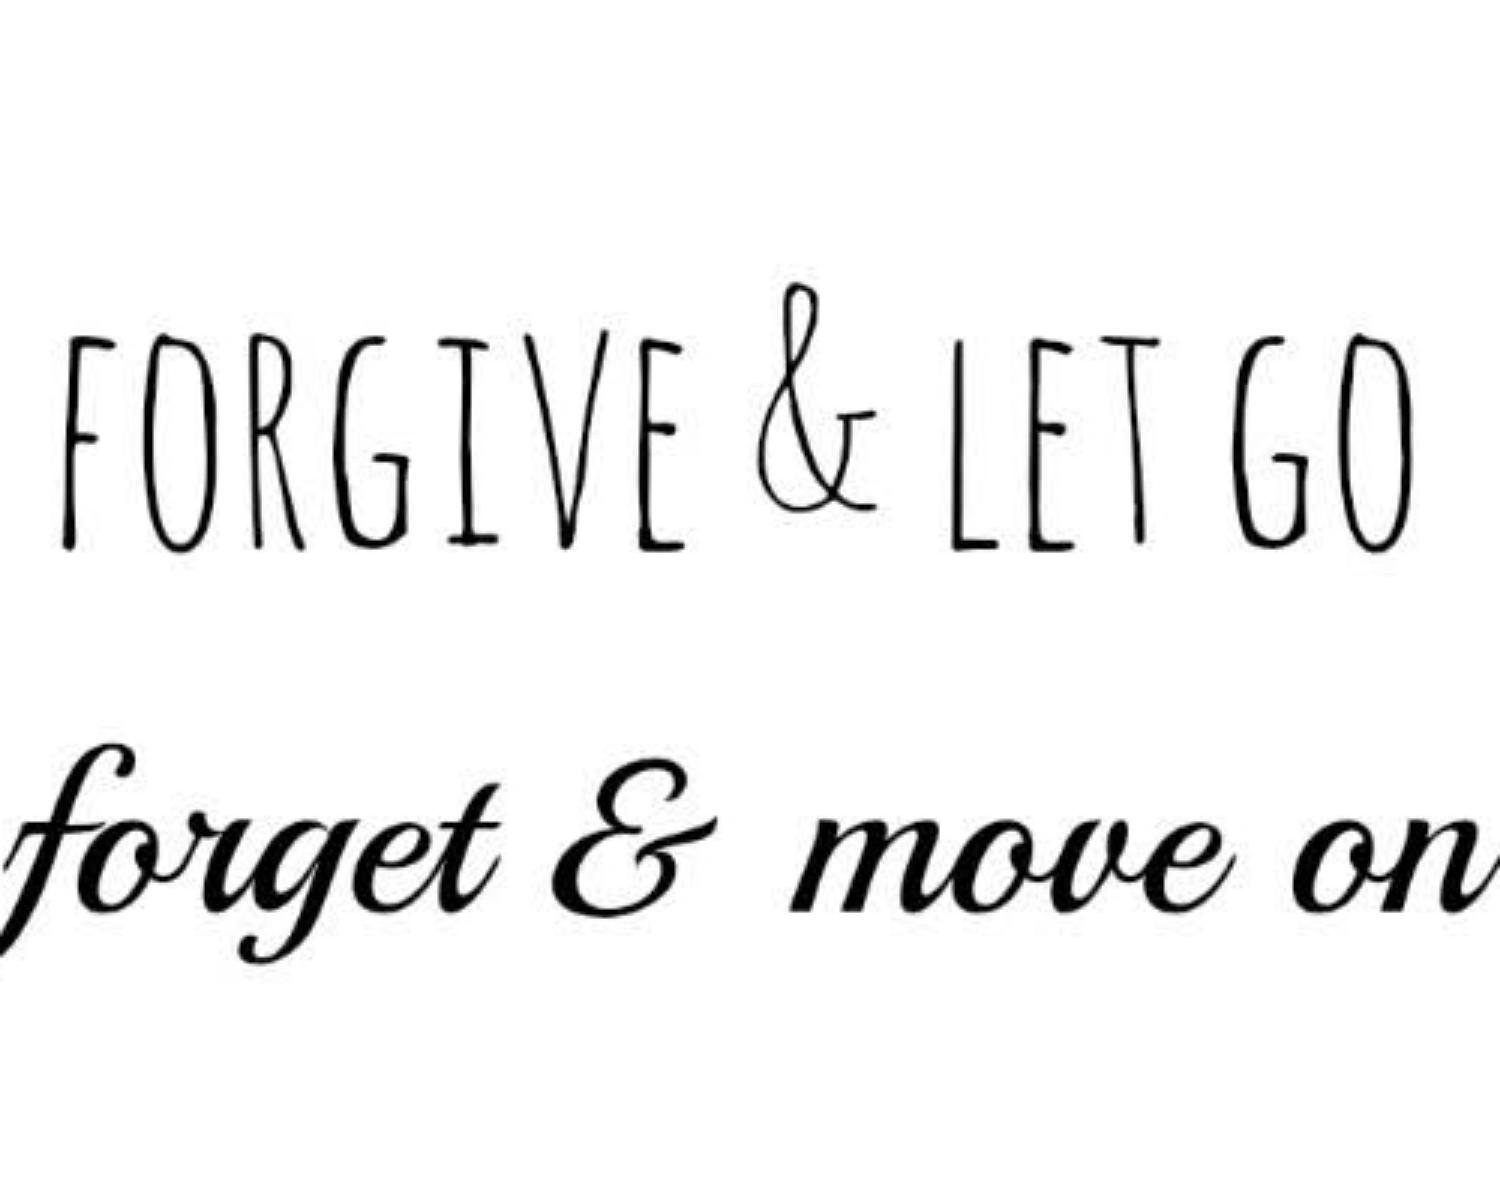 2. Forgive and forget.